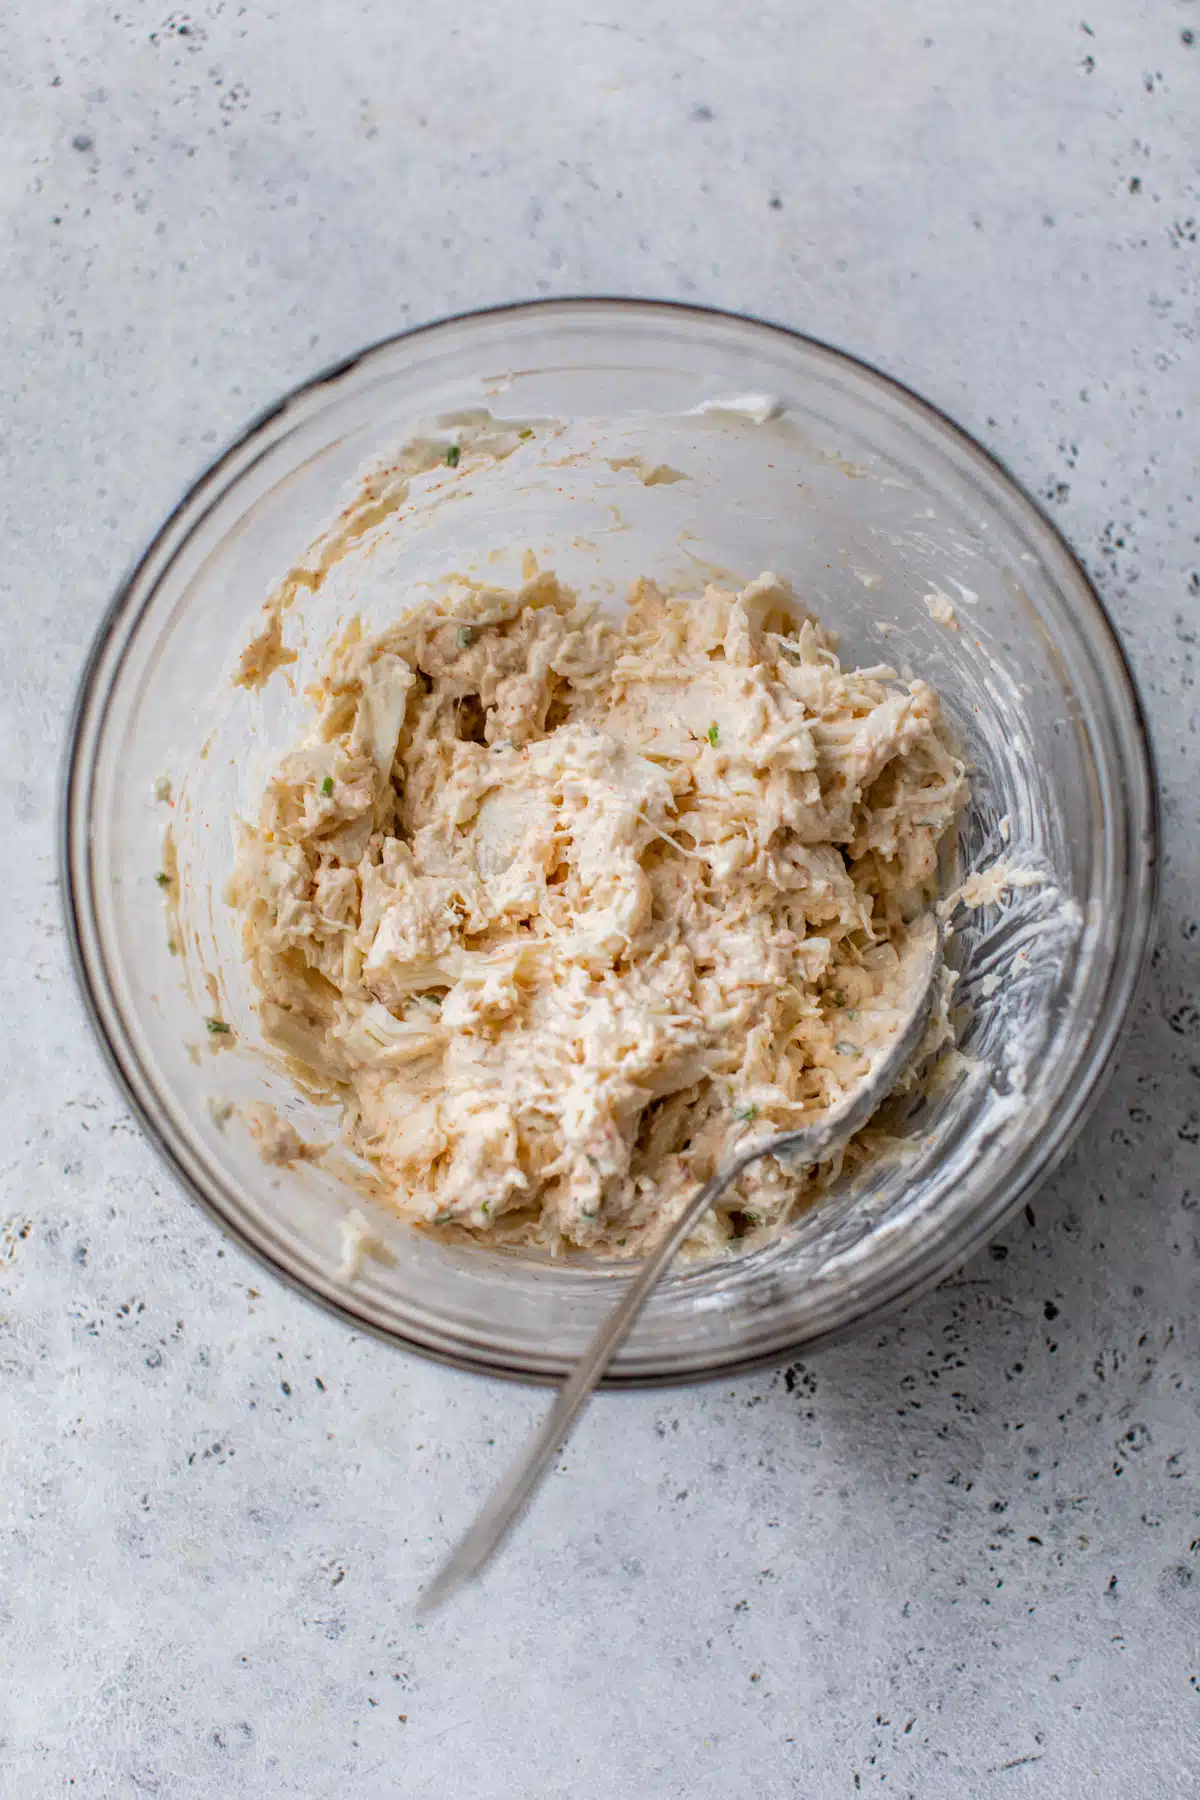 crab meat added to the greek yogurt mixture in a glass bowl with a spoon